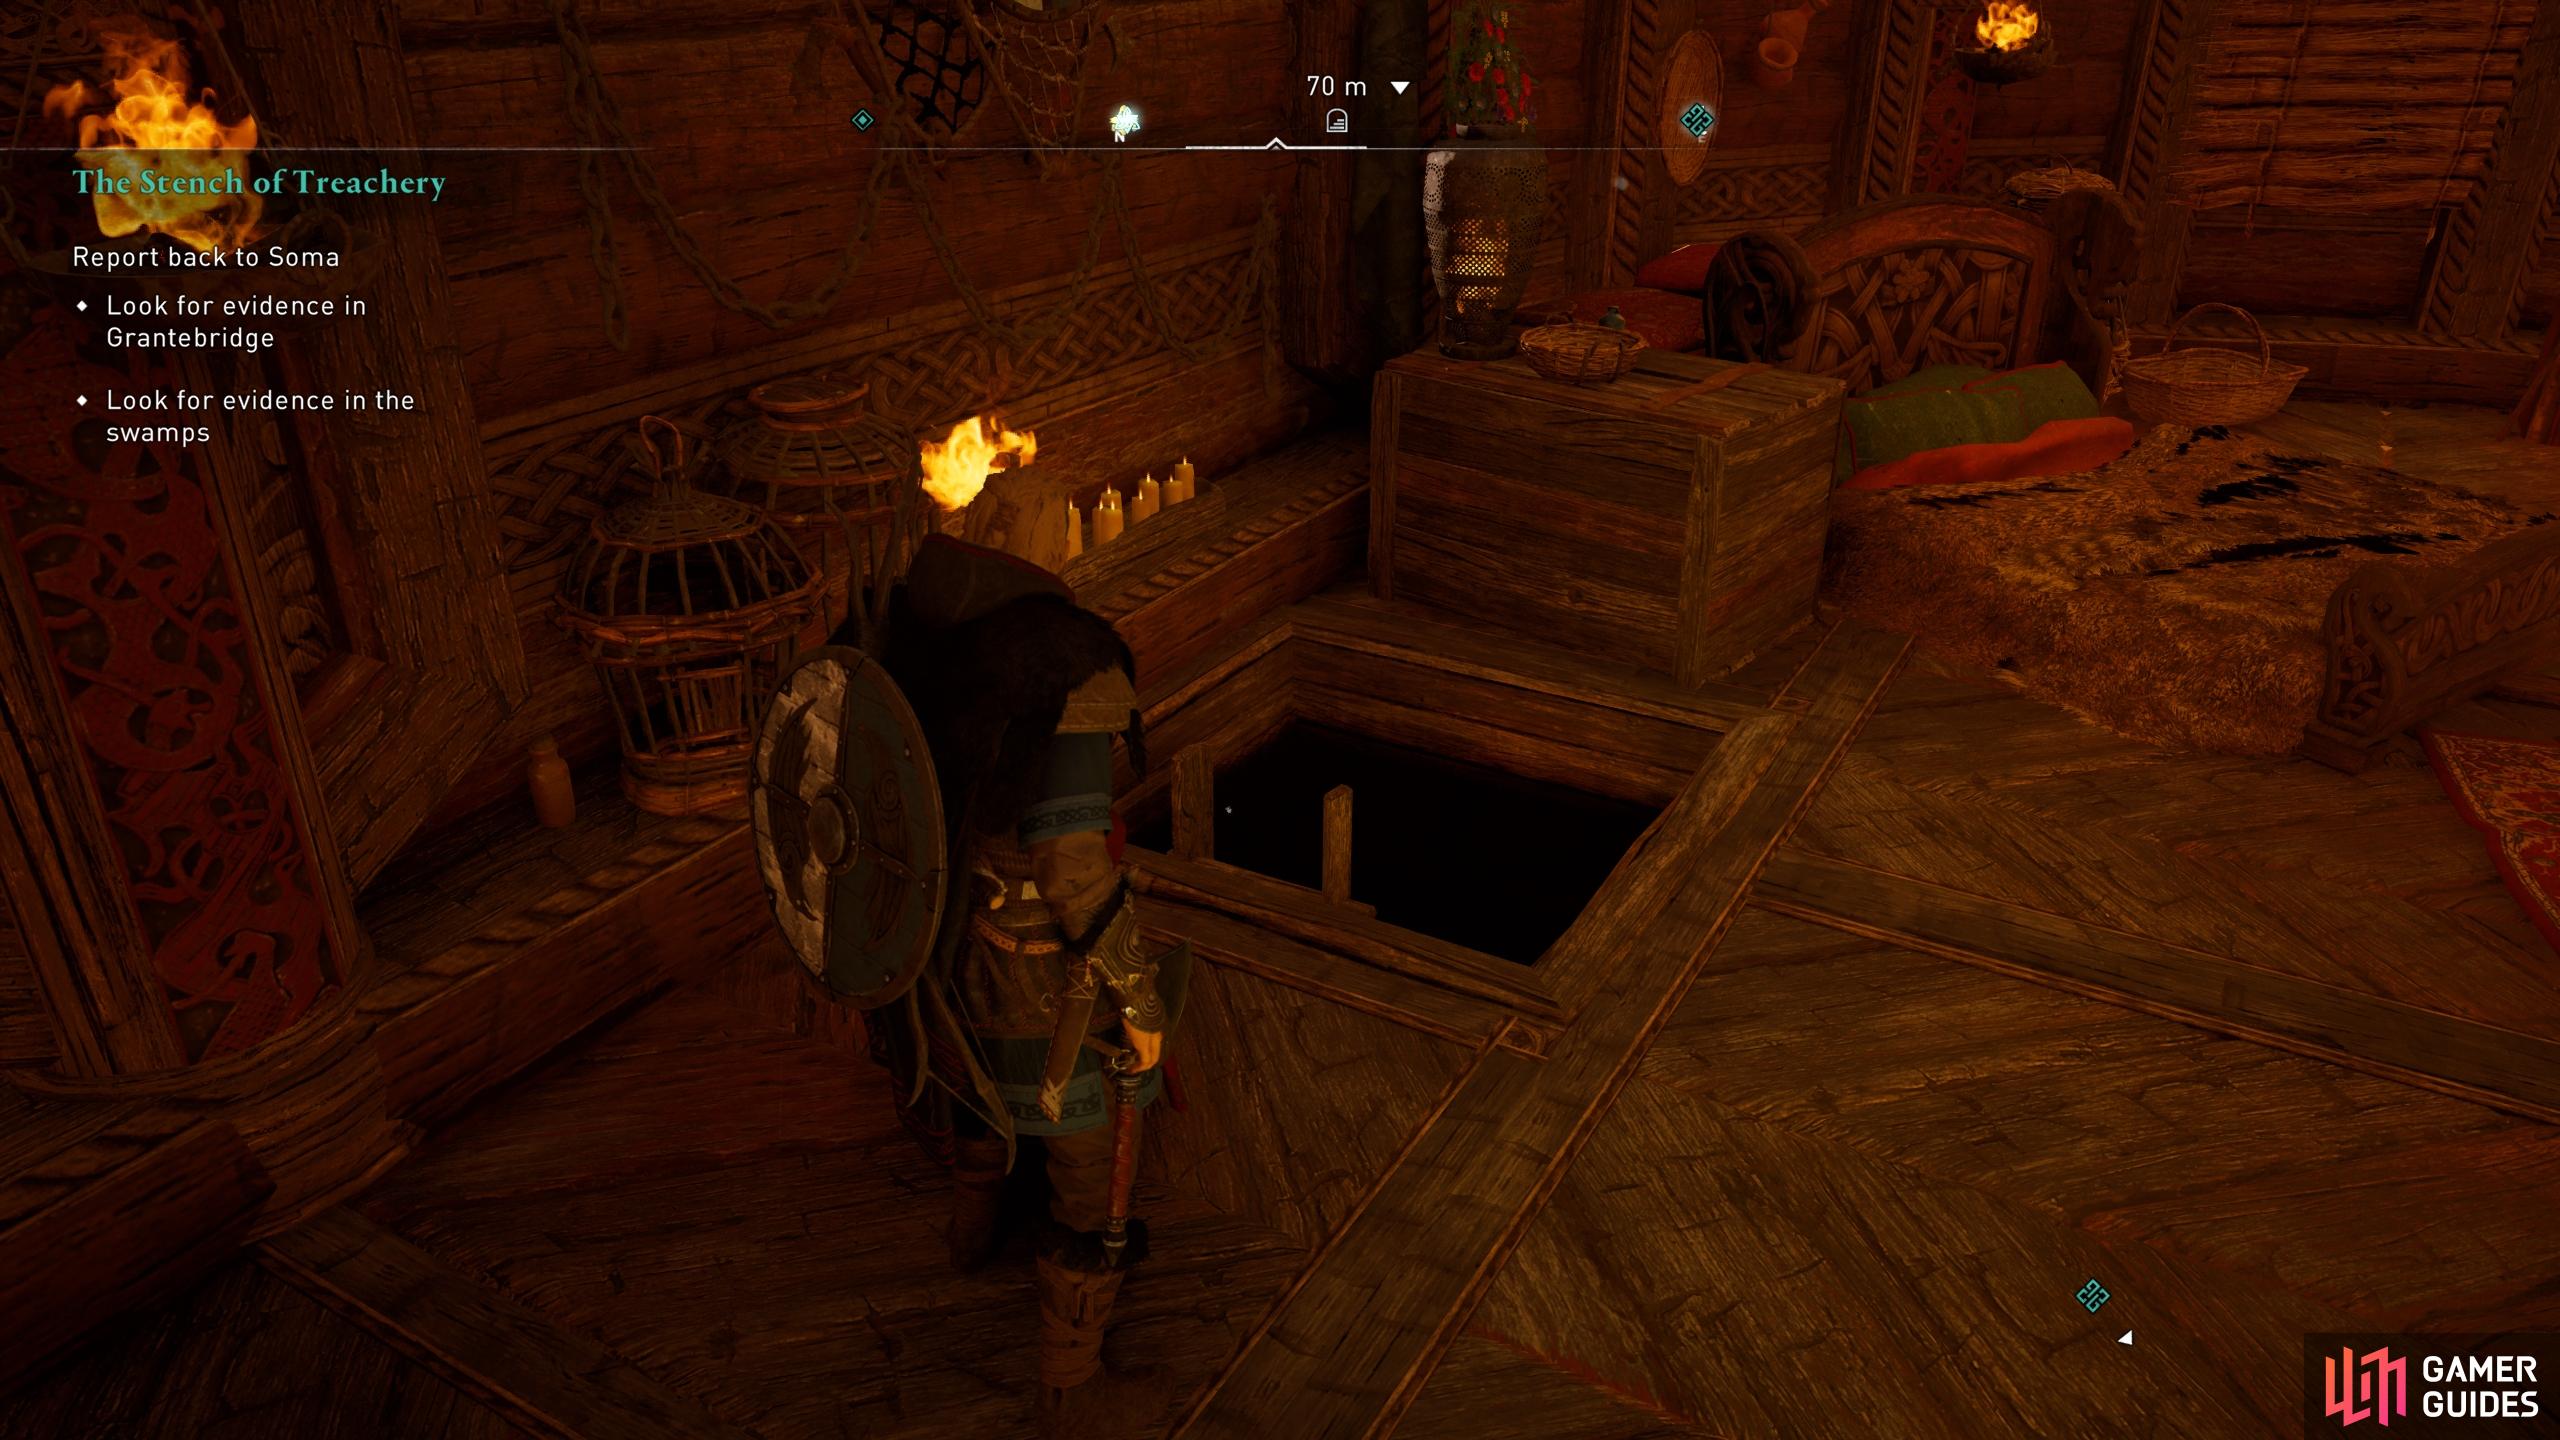 Enter the tunnels from the hole in Soma's living quarters within the longhouse.